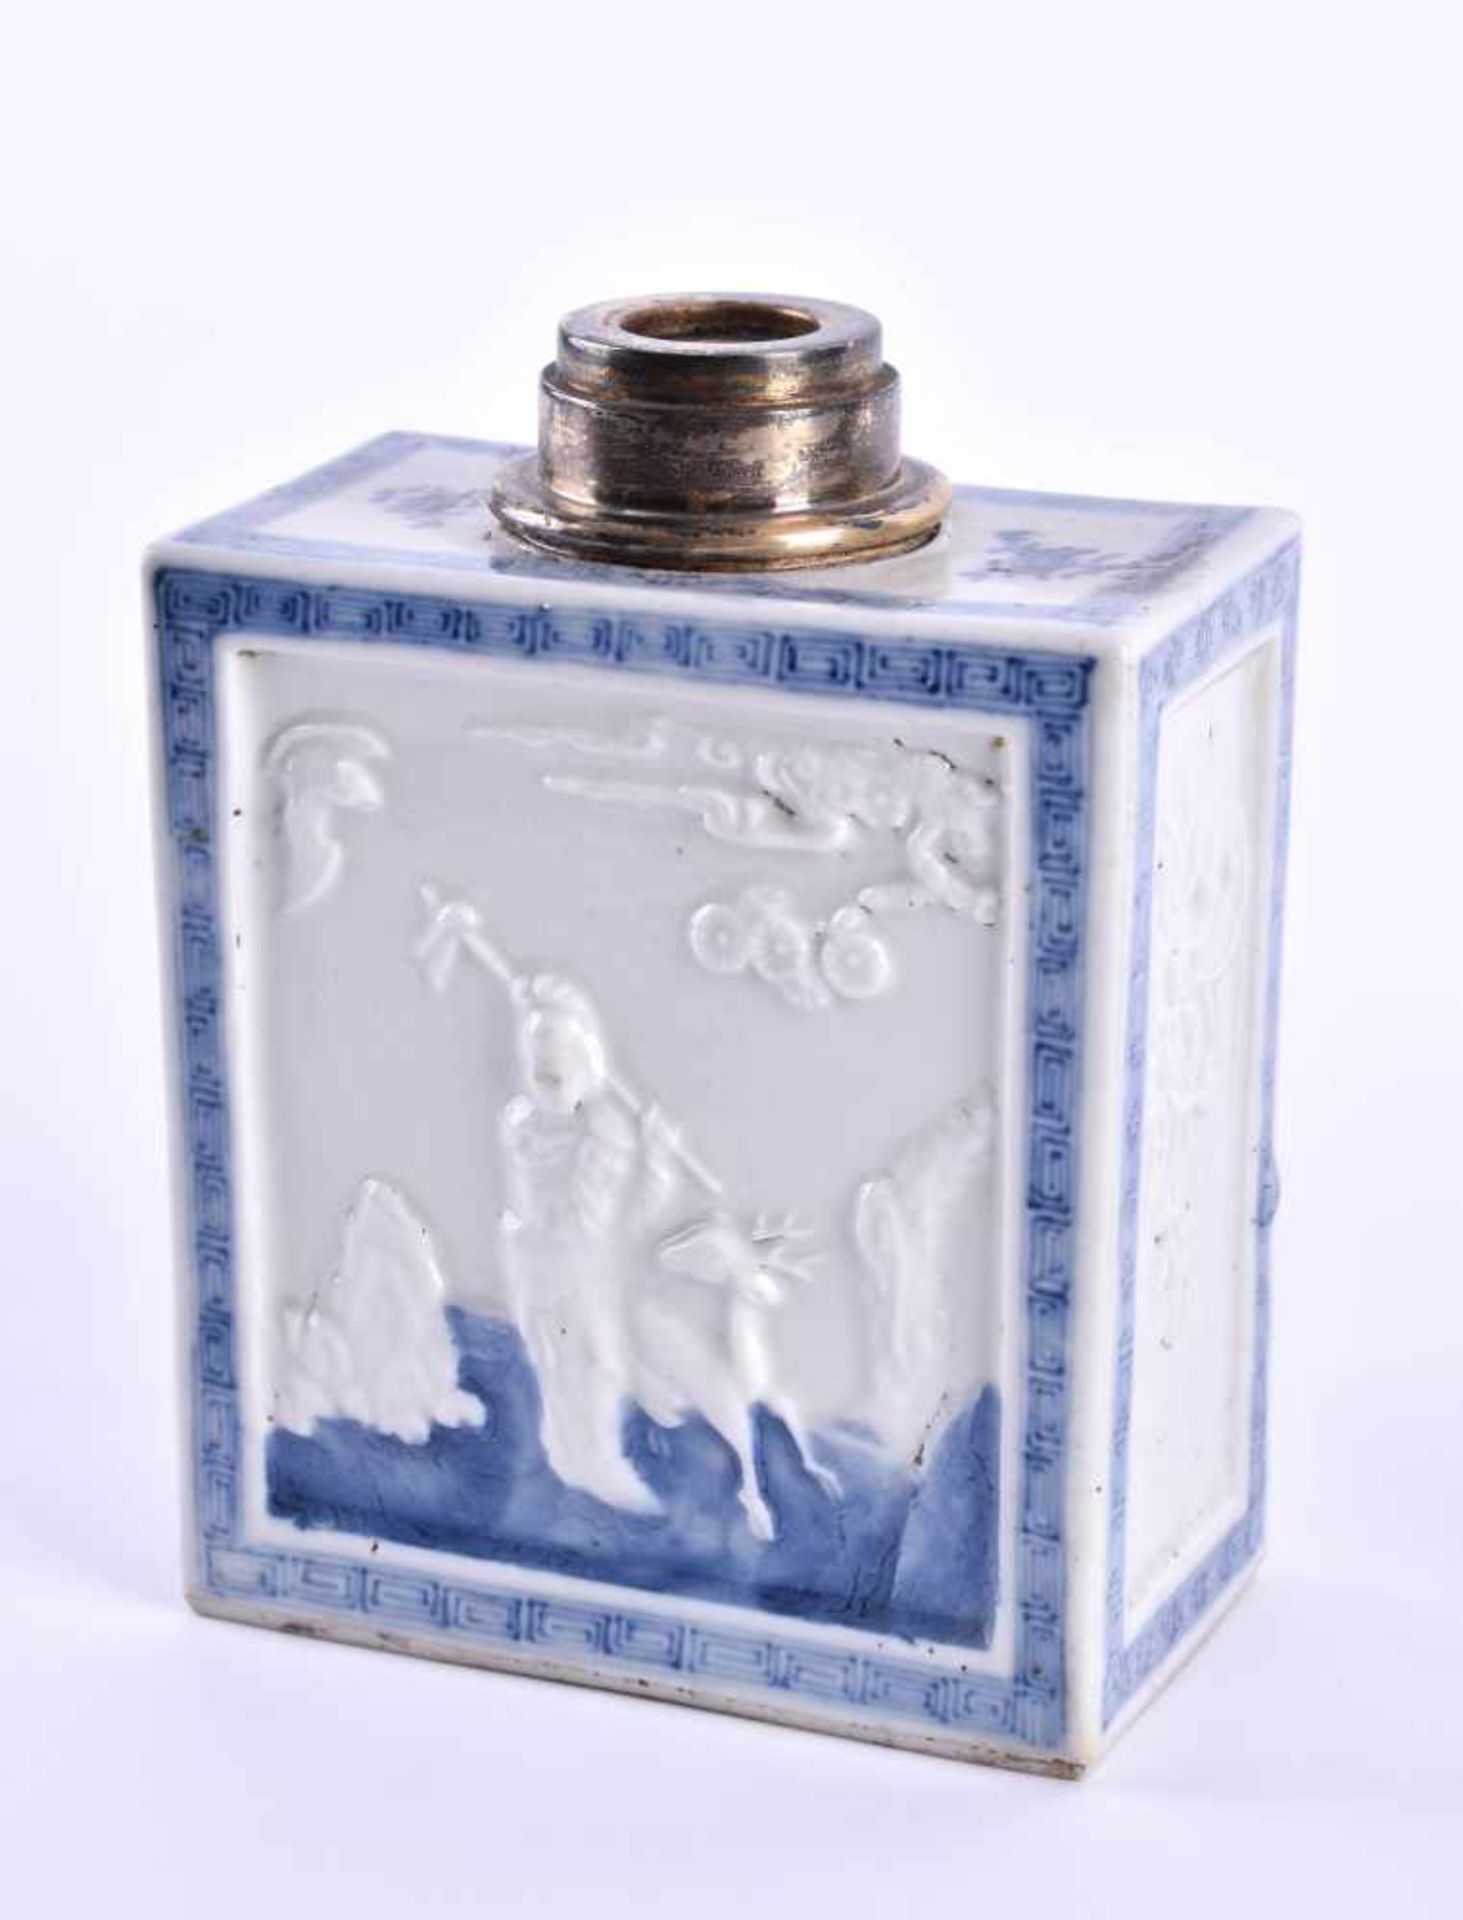 Tea box China Qing period, Kangxiwith blue and white painting, spout with silver mounting,